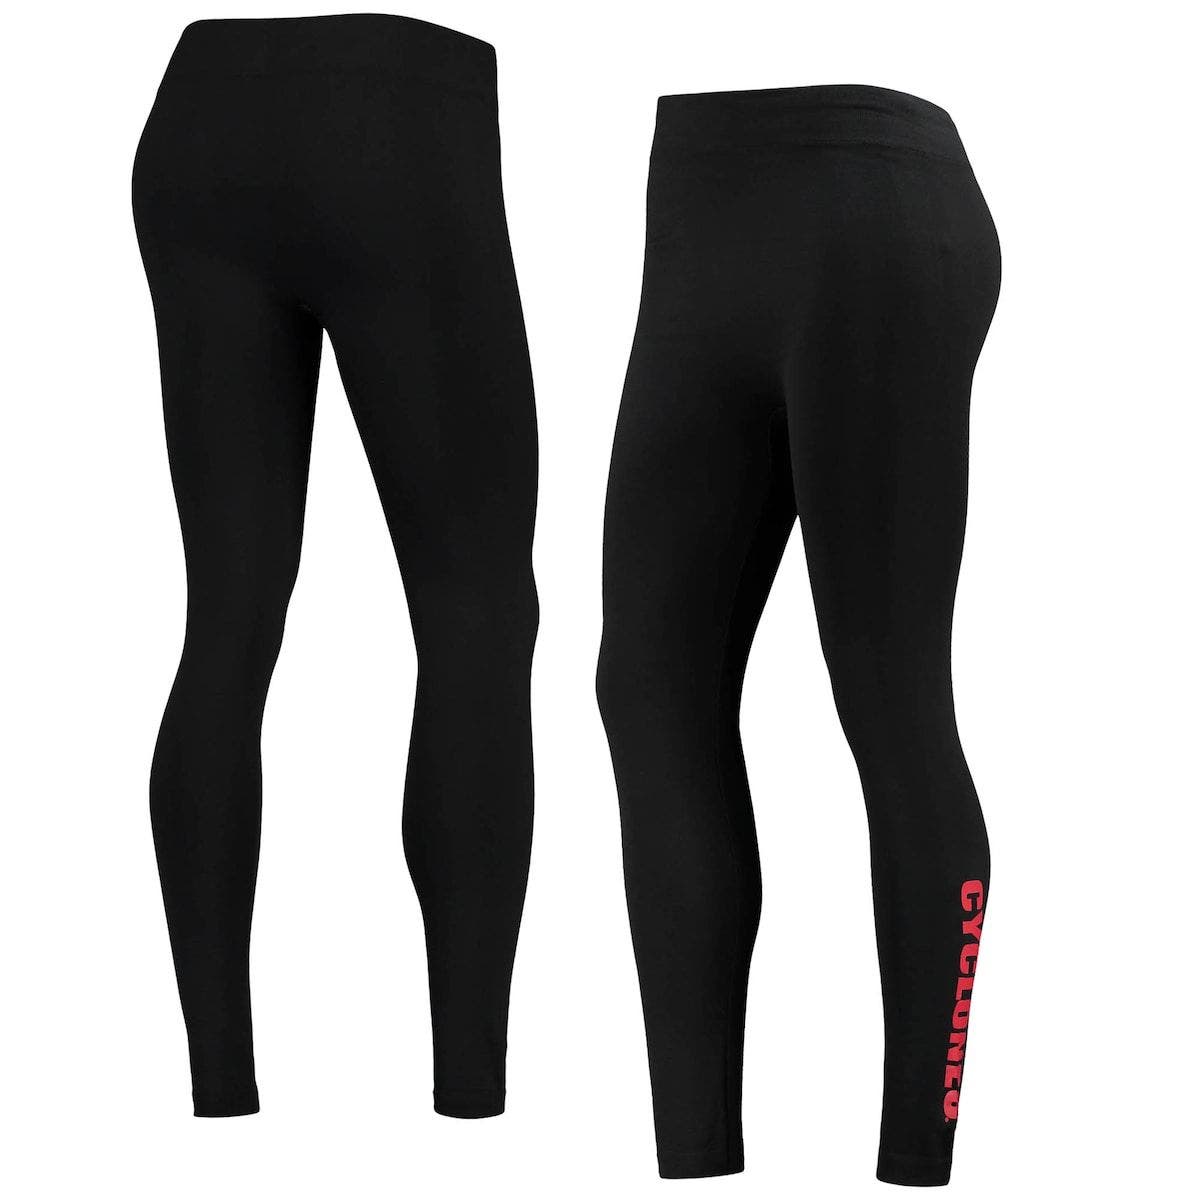 More Mile Womens Thermal Fleecy Padded Cycling Tights Black